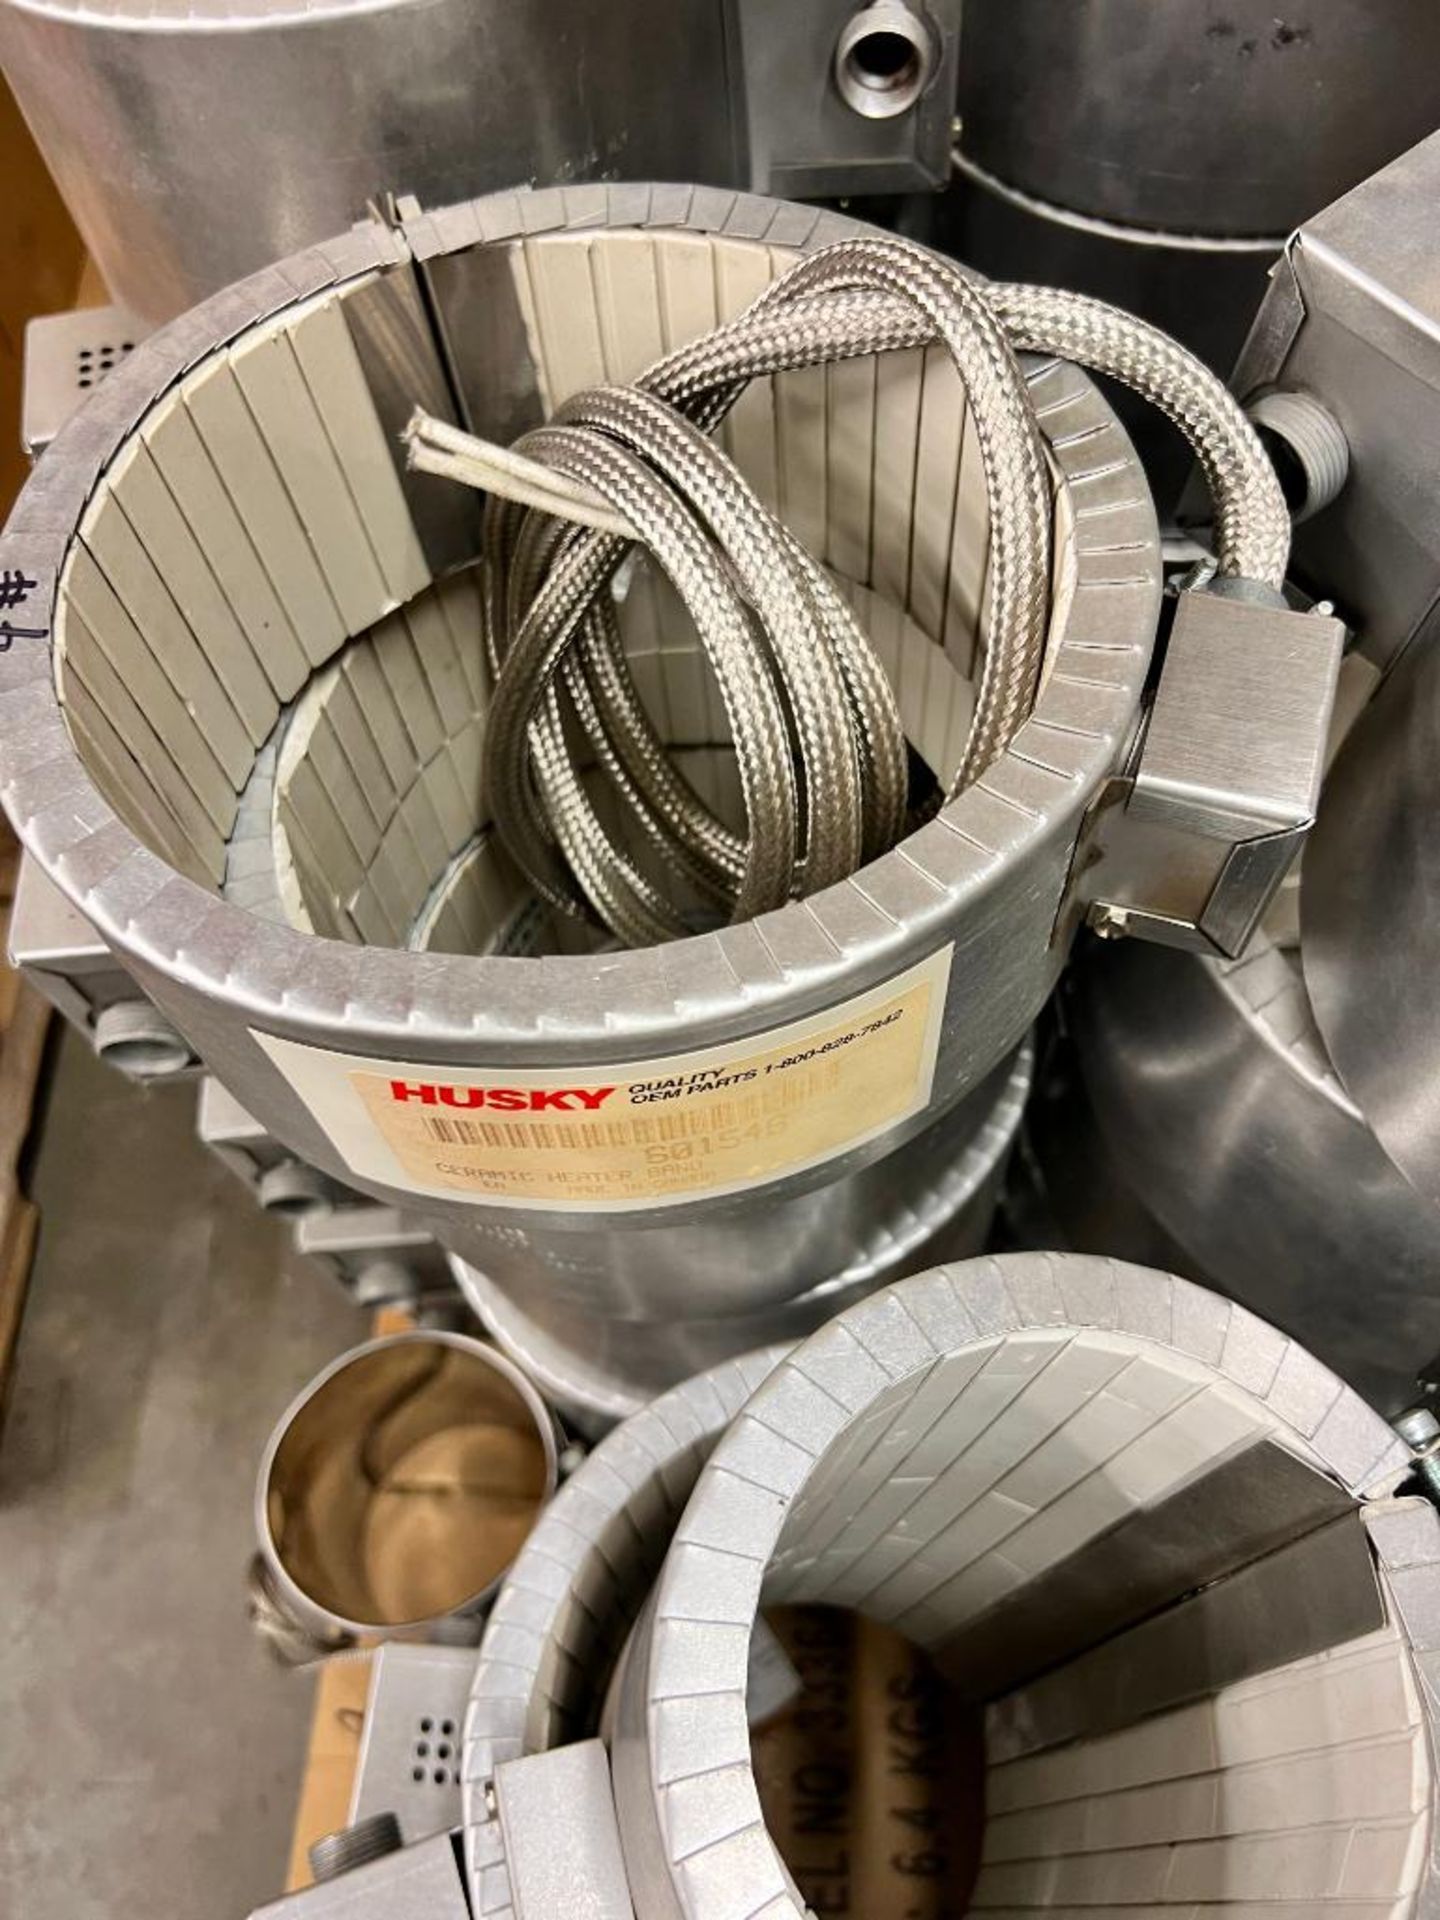 SKID OF HUSKY BAND HEATERS, VARIOUS SIZES (NEW) - Image 2 of 6